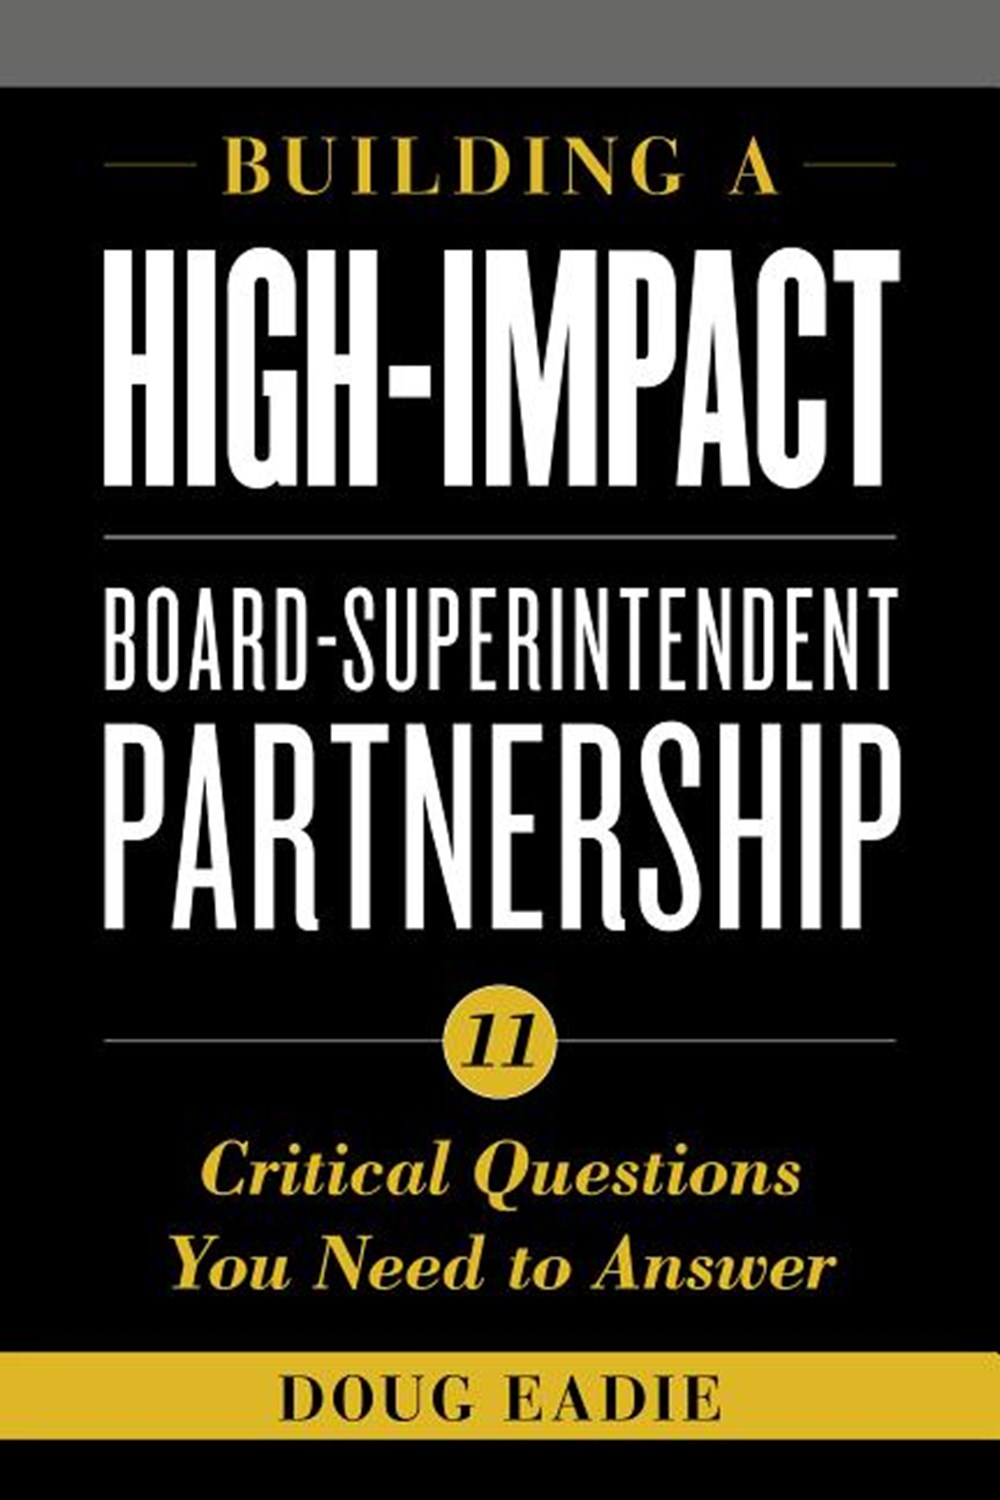 Building a High-Impact Board-Superintendent Partnership in Paperback by